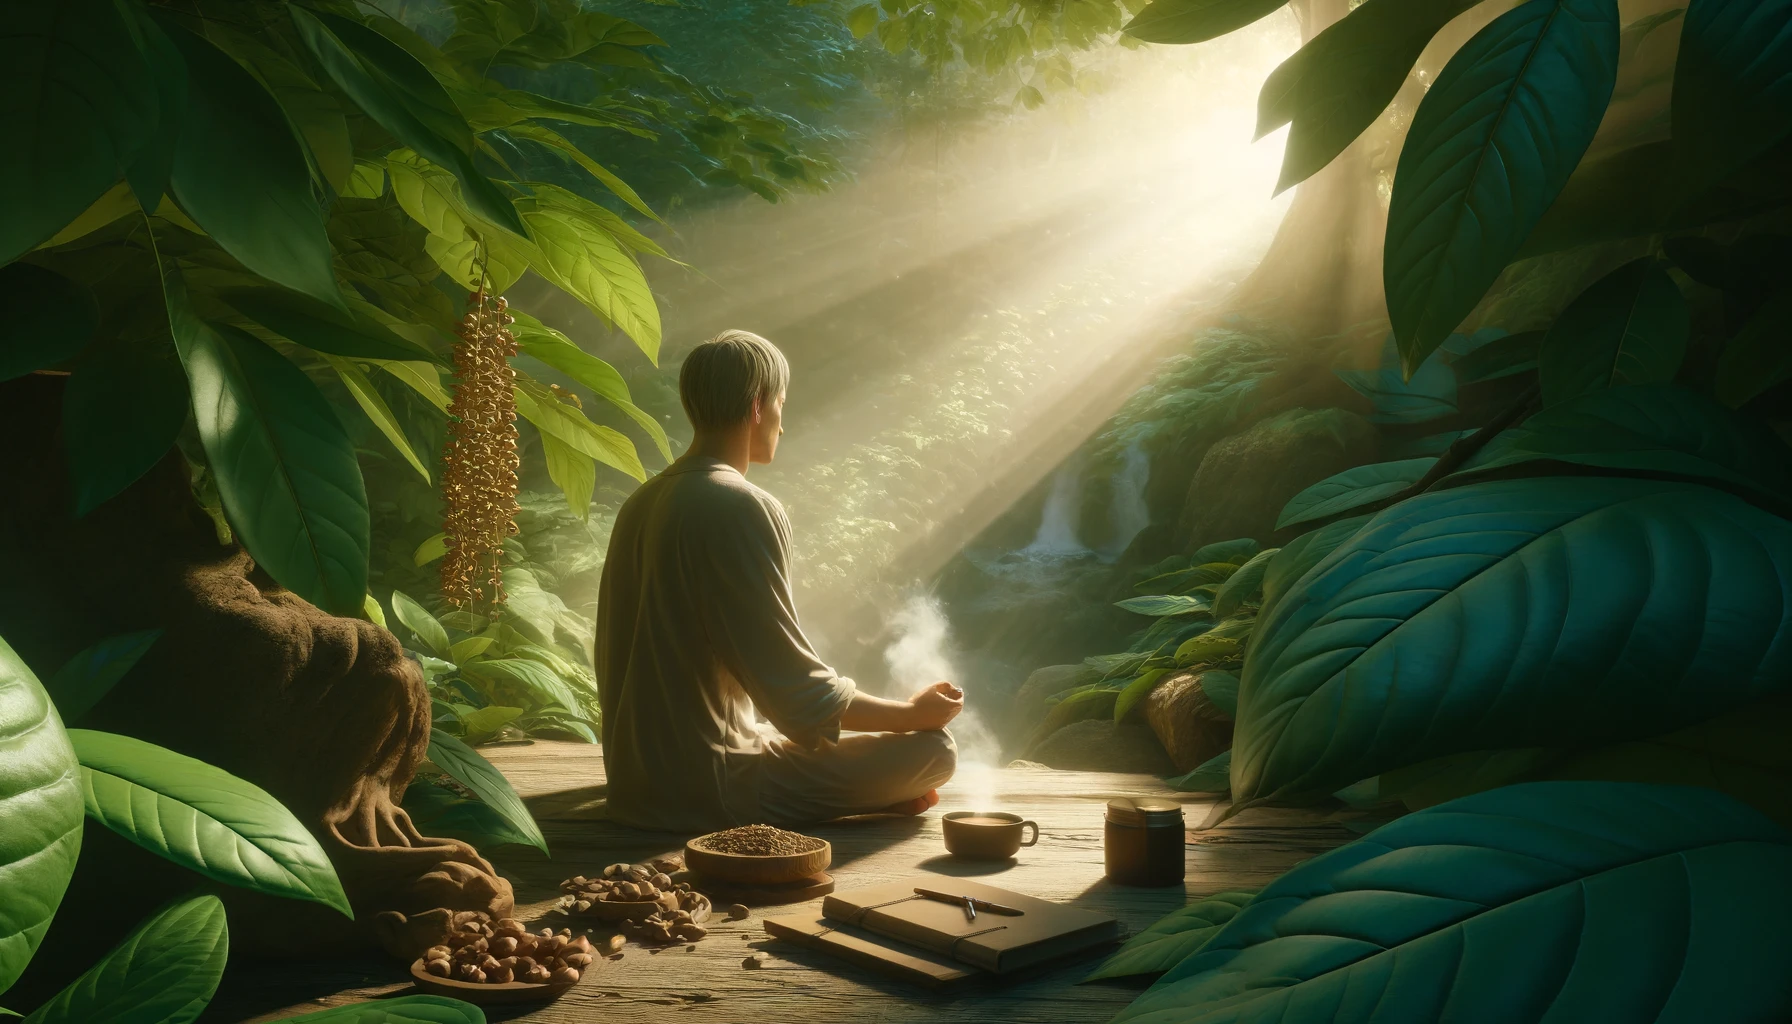 A hyper-realistic image depicting the therapeutic effects of kratom, illustrating a serene and peaceful atmosphere. The scene shows a person sitting in a relaxed pose in a beautiful natural environment, surrounded by lush green leaves. Soft sunlight filters through the foliage, casting gentle light on their calm face. The person holds a warm cup in one hand, symbolizing a soothing kratom tea. Nearby, there's a journal and a pen, representing mindfulness and reflection. The overall mood is tranquil, embodying relaxation and well-being.